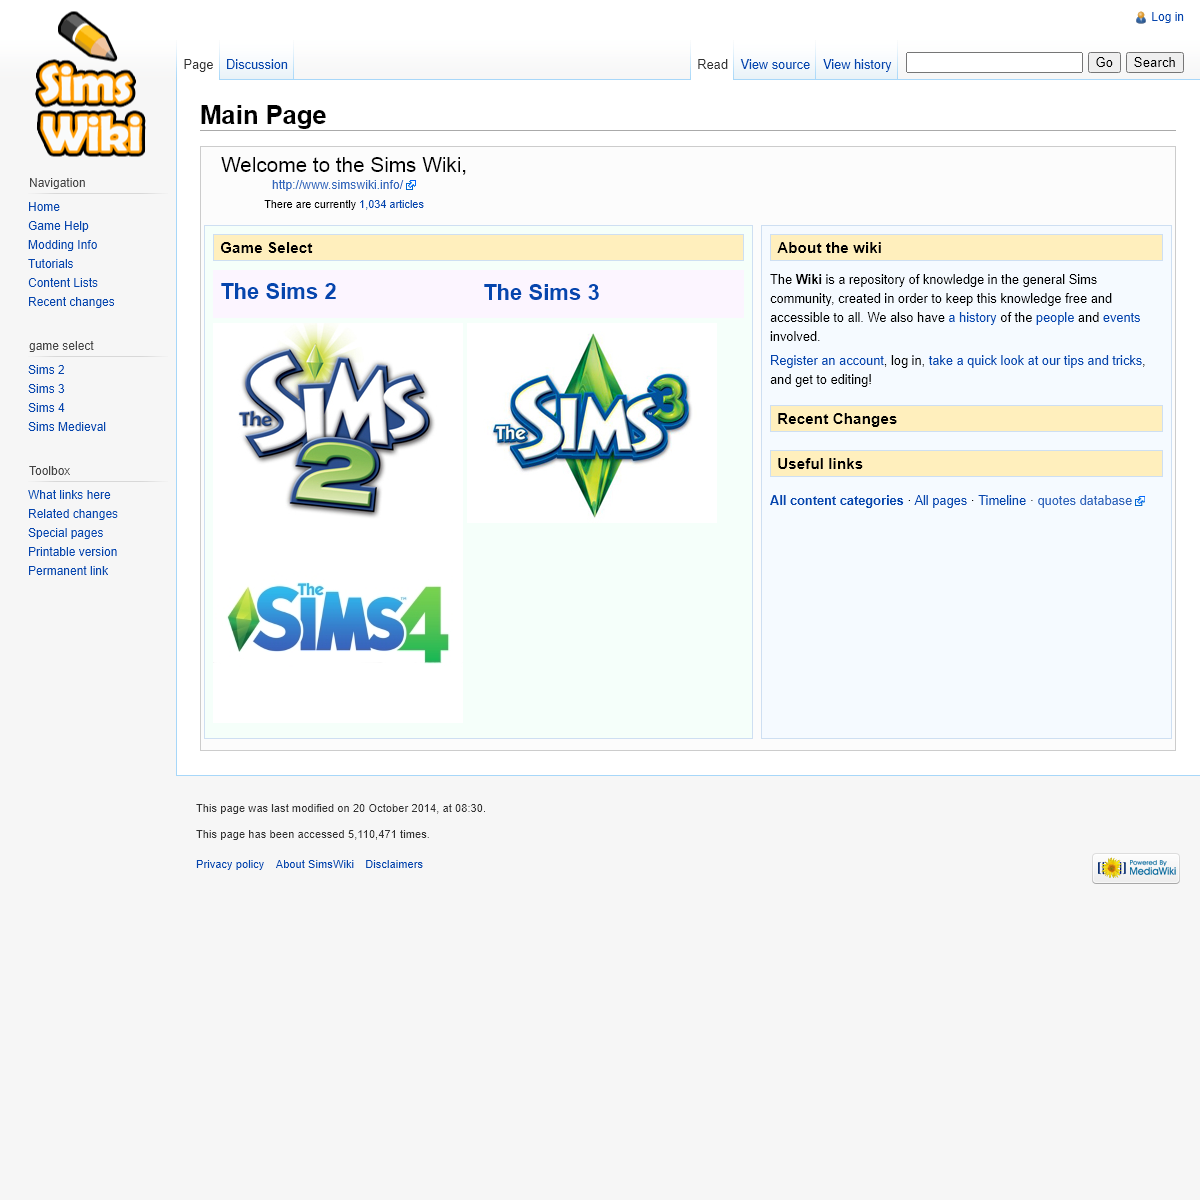 A complete backup of simswiki.info